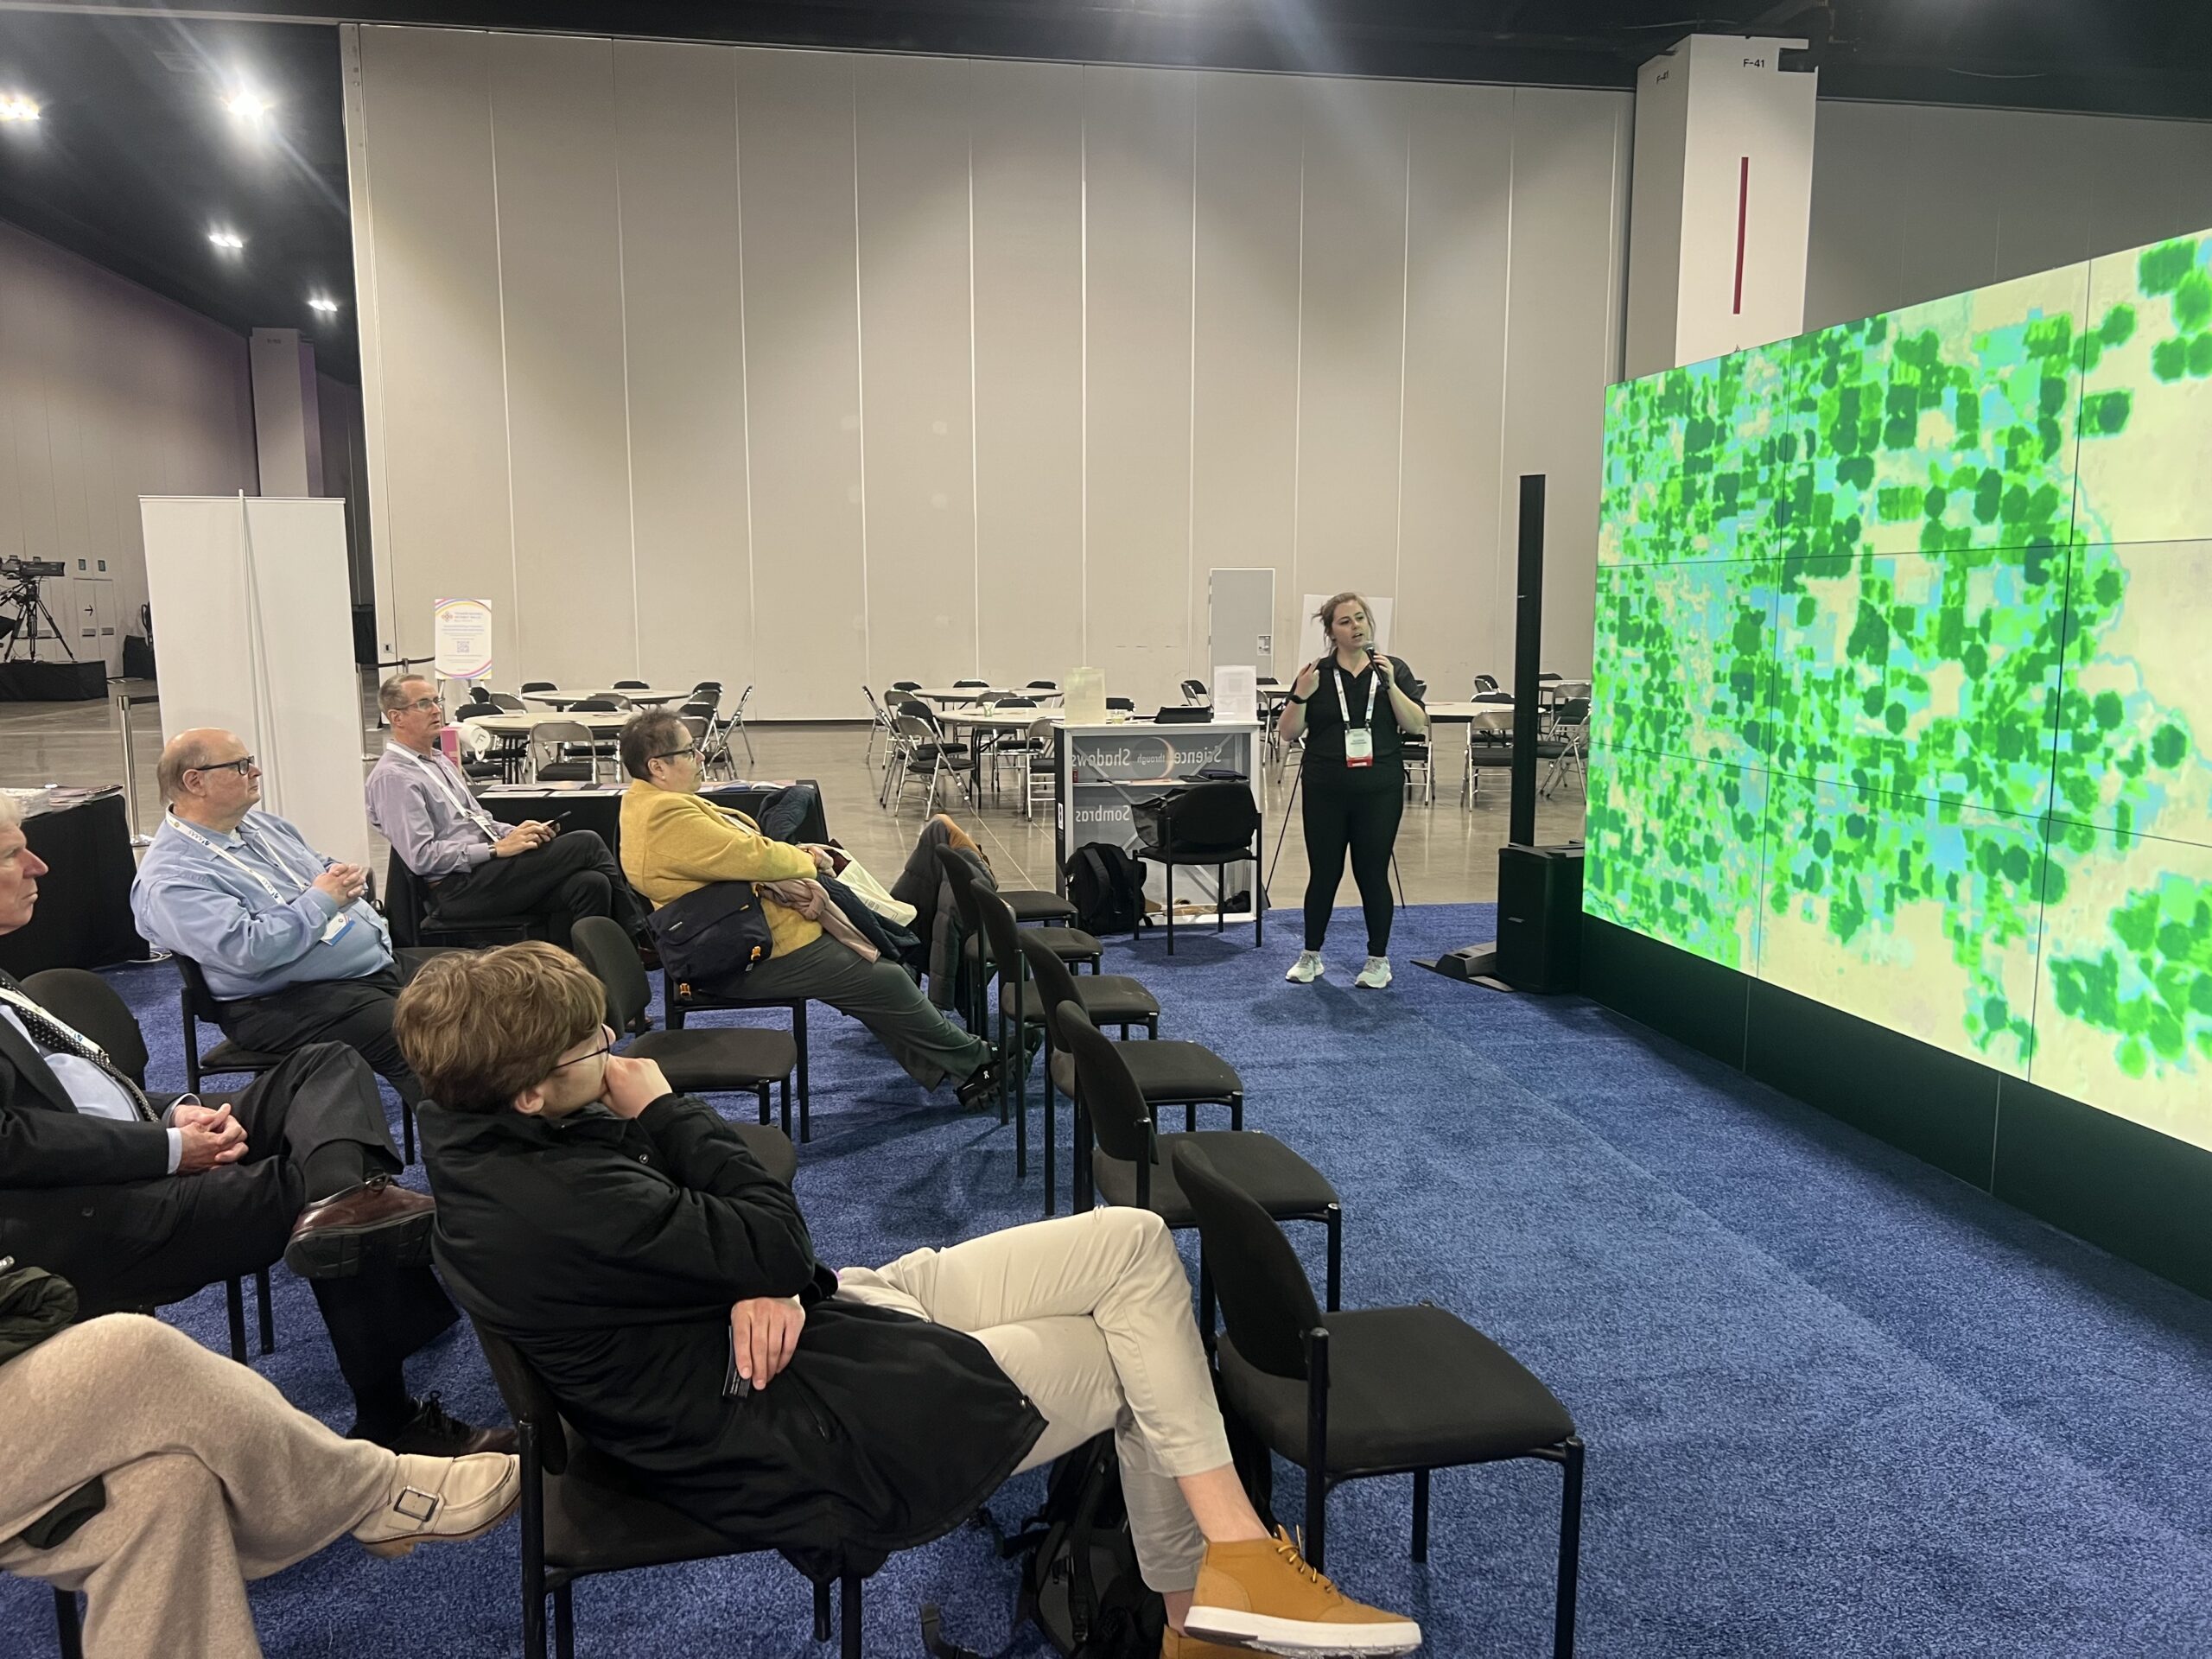 Allison Nussbaum gives a Hyperwall talk about Landsat’s free-and-open data policy and how it paved the way for data products including vegetation indices and evapotranspiration.